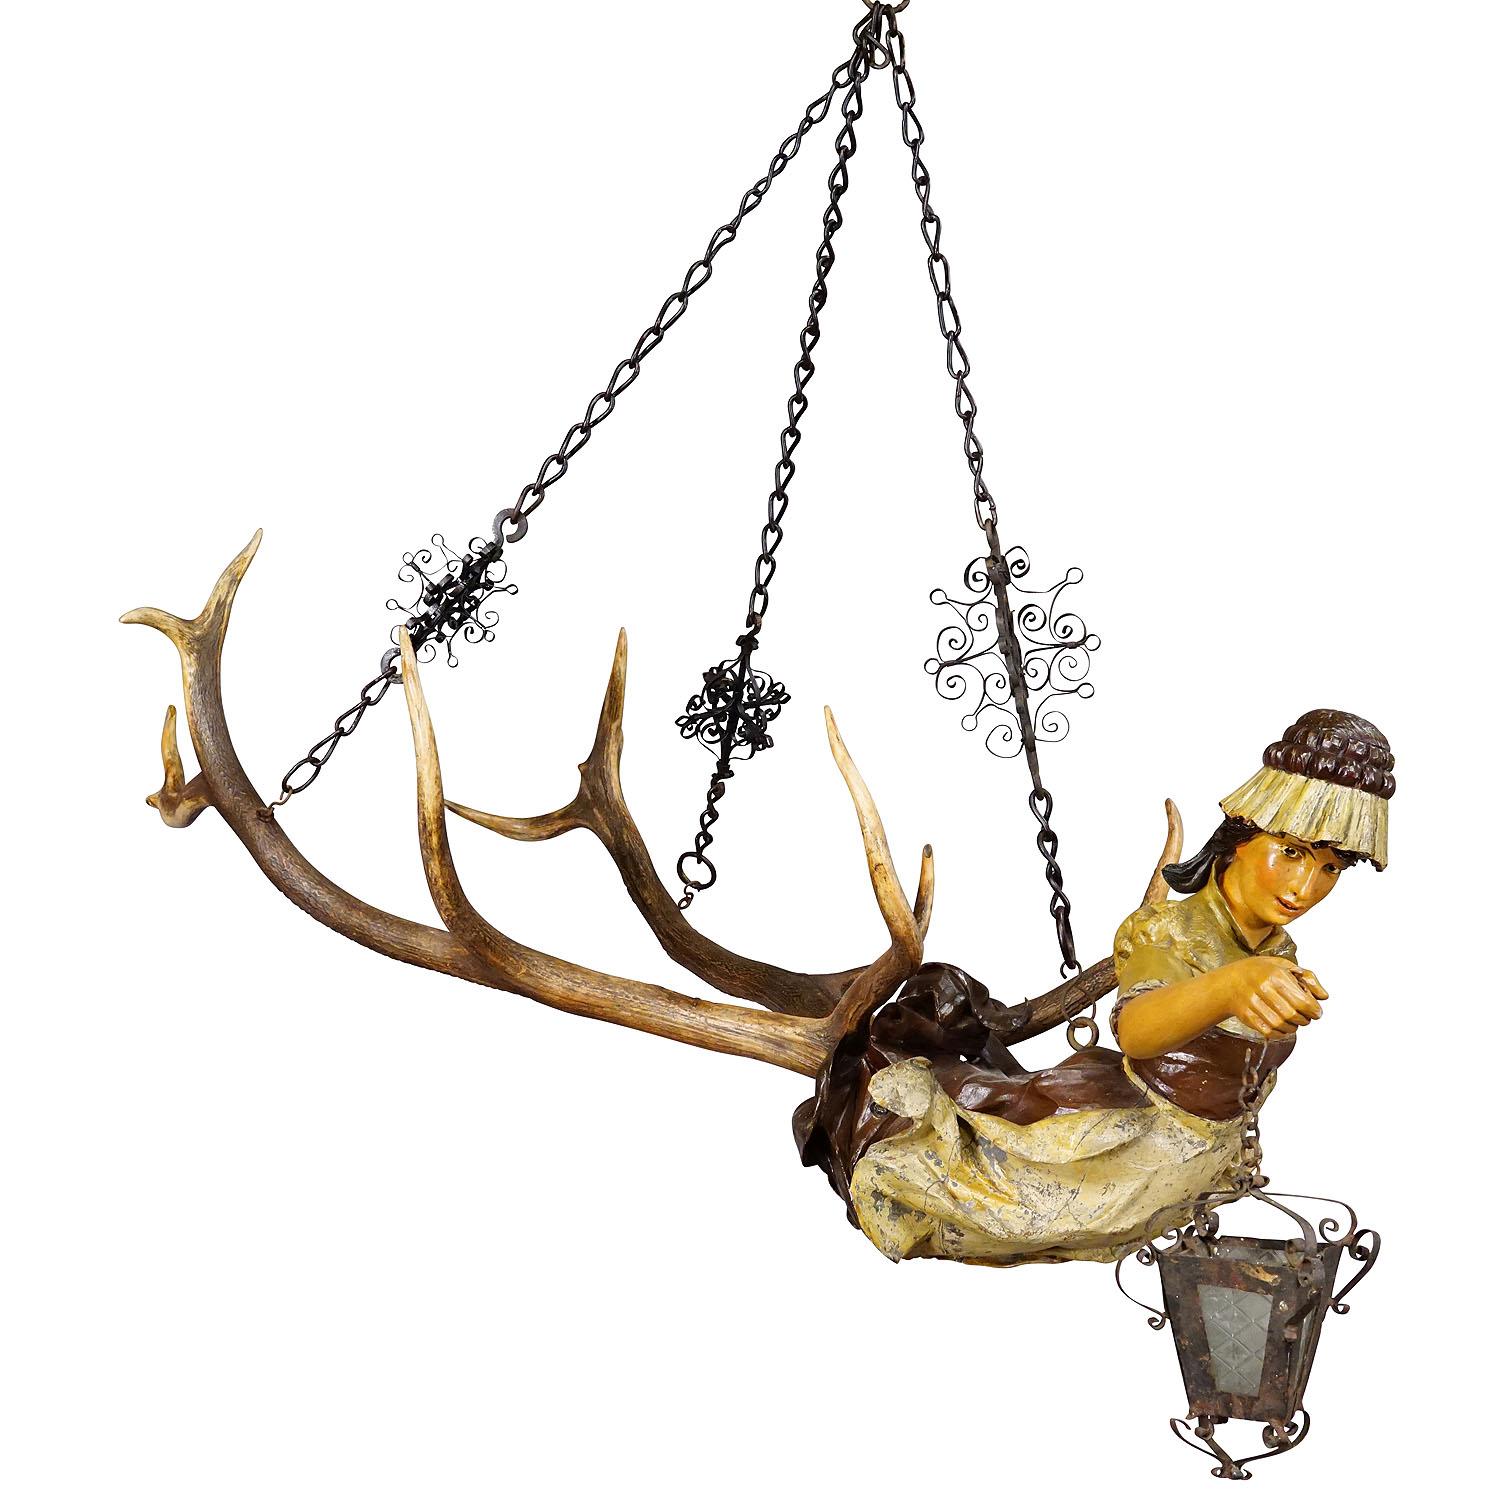 Antique Lusterweibchen of a Patrician Lady ca. 1890

An antique lusterweibchen chandelier of a medieval patrician lady holding a handforged latern. The luster is made of wood with a handpainted finish and mounted on a large pair of deer antlers. It